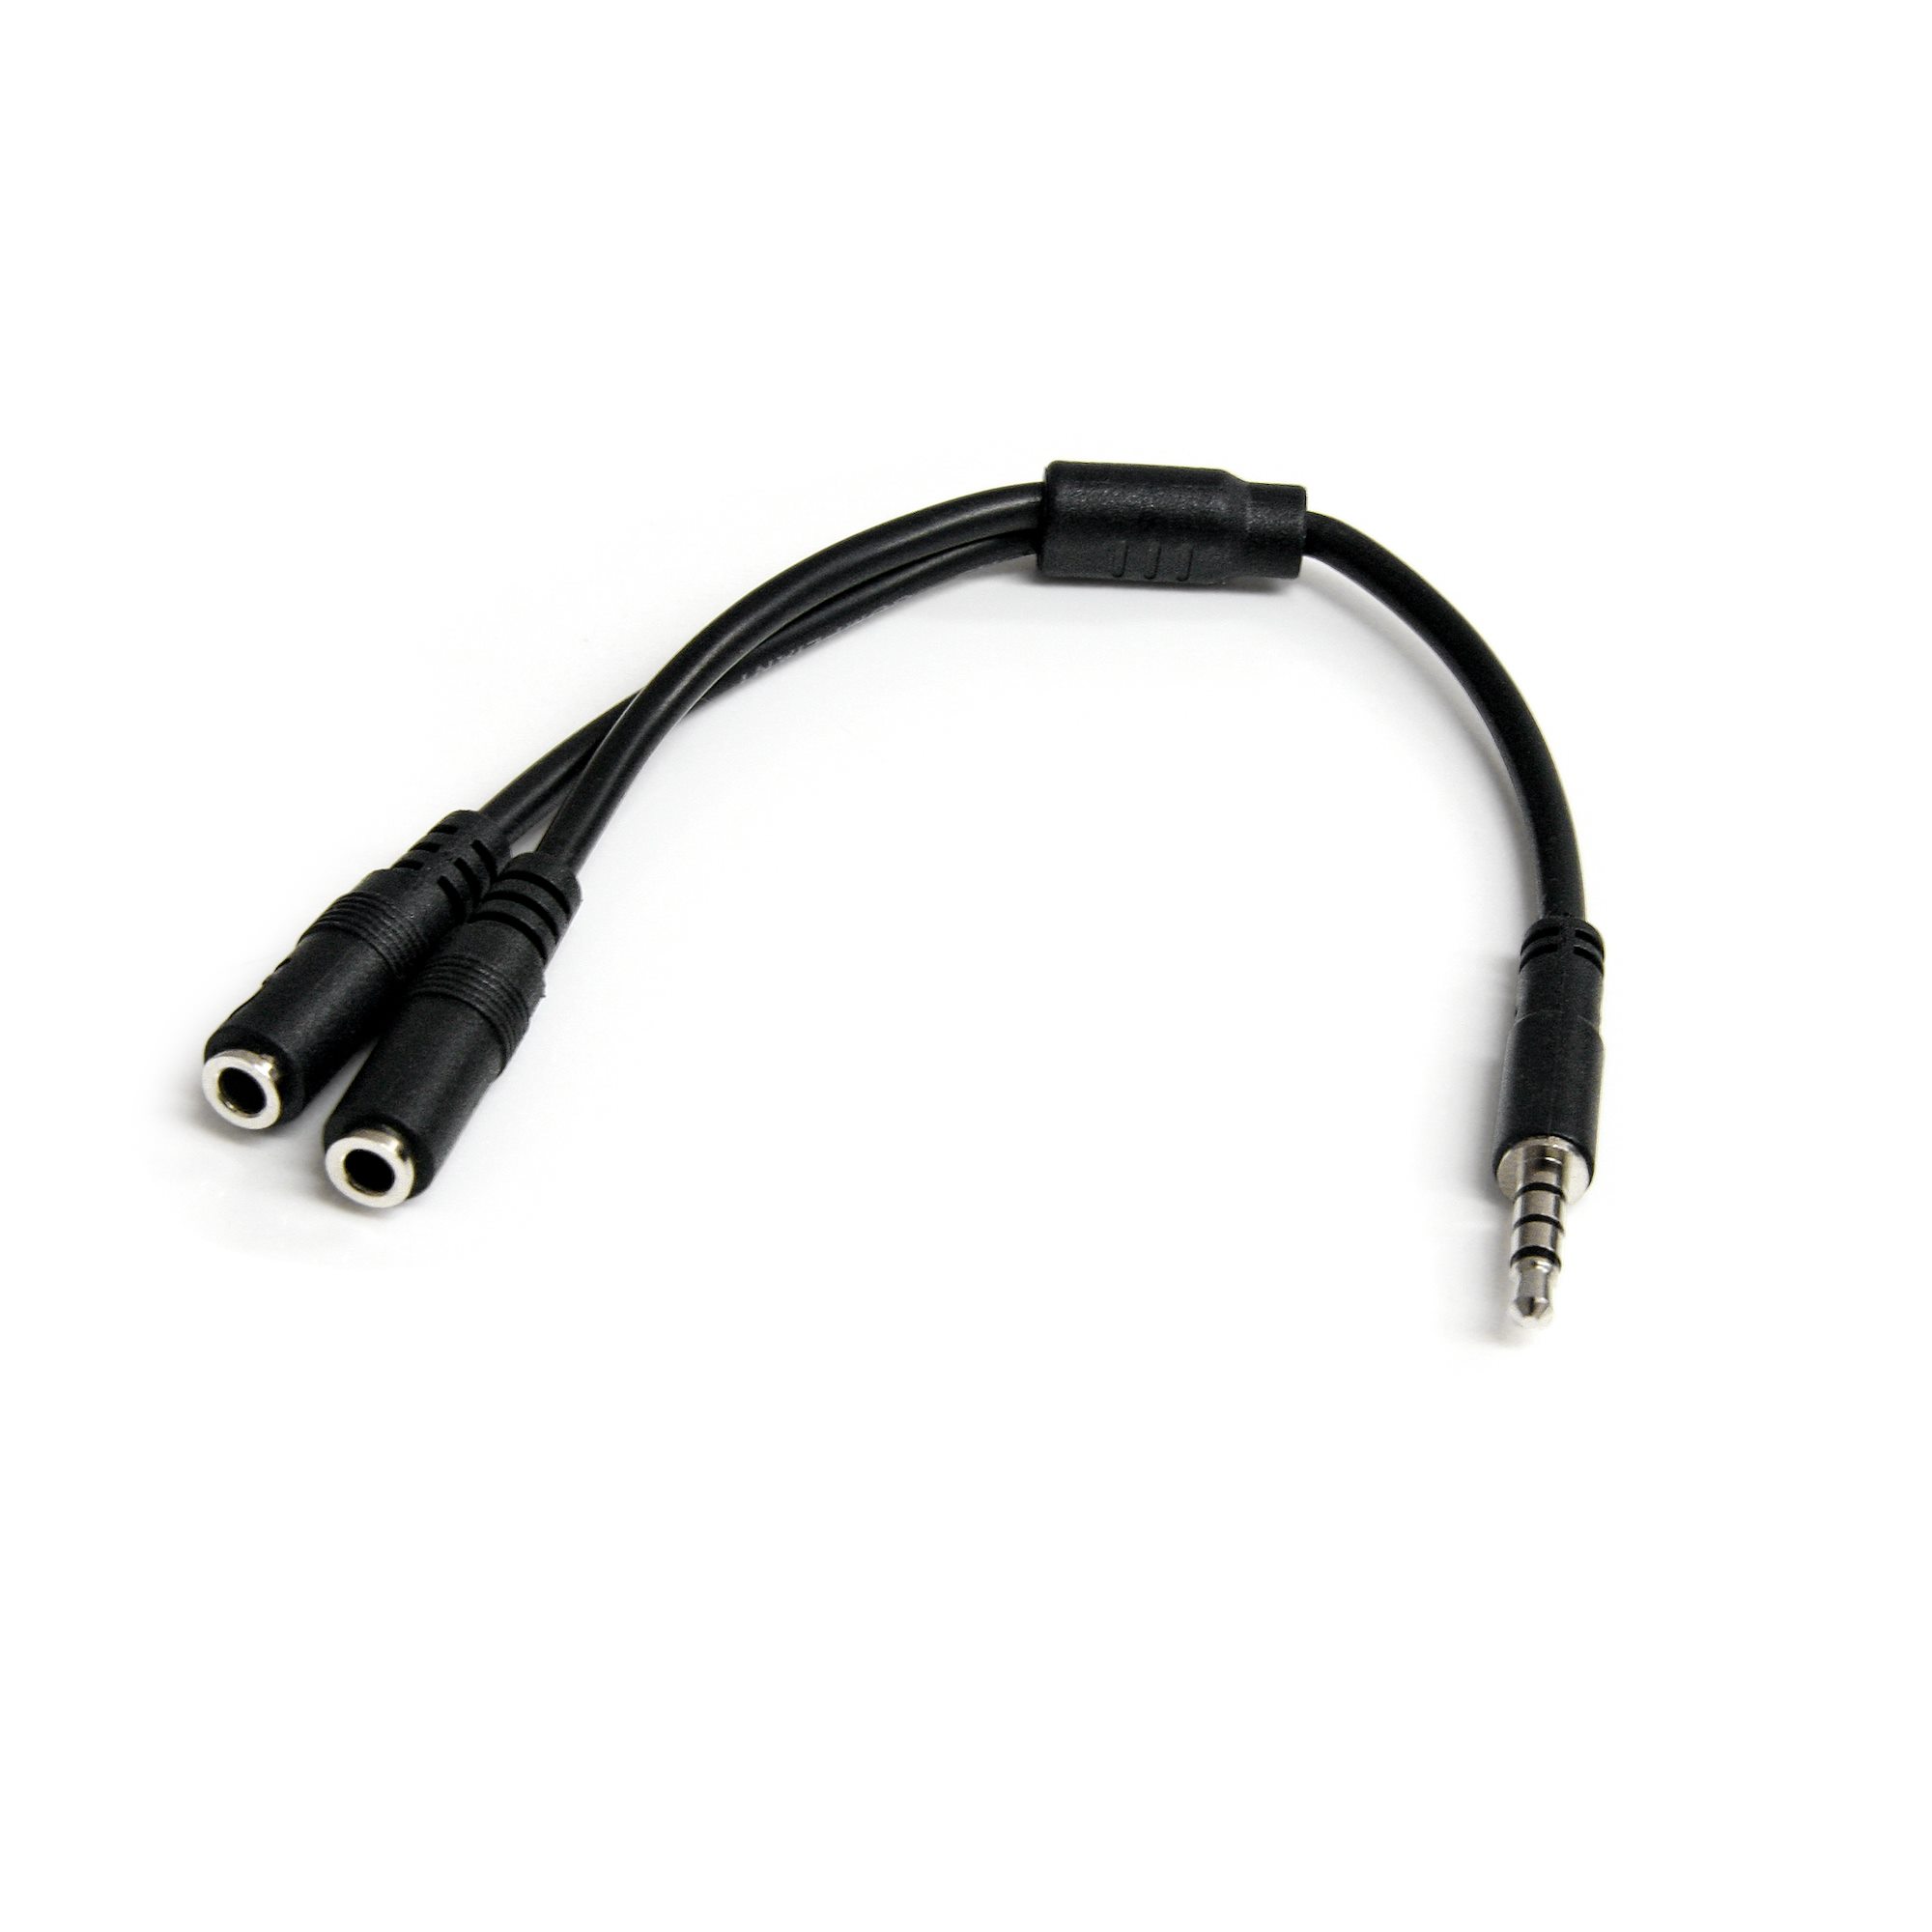 Pack of 3 ＬＥＤ　ＬＥＡＤＥＲ 3.5mm Stereo Jack to 1/4 Stereo Plug Adapter black Headphone Jack Adapter 